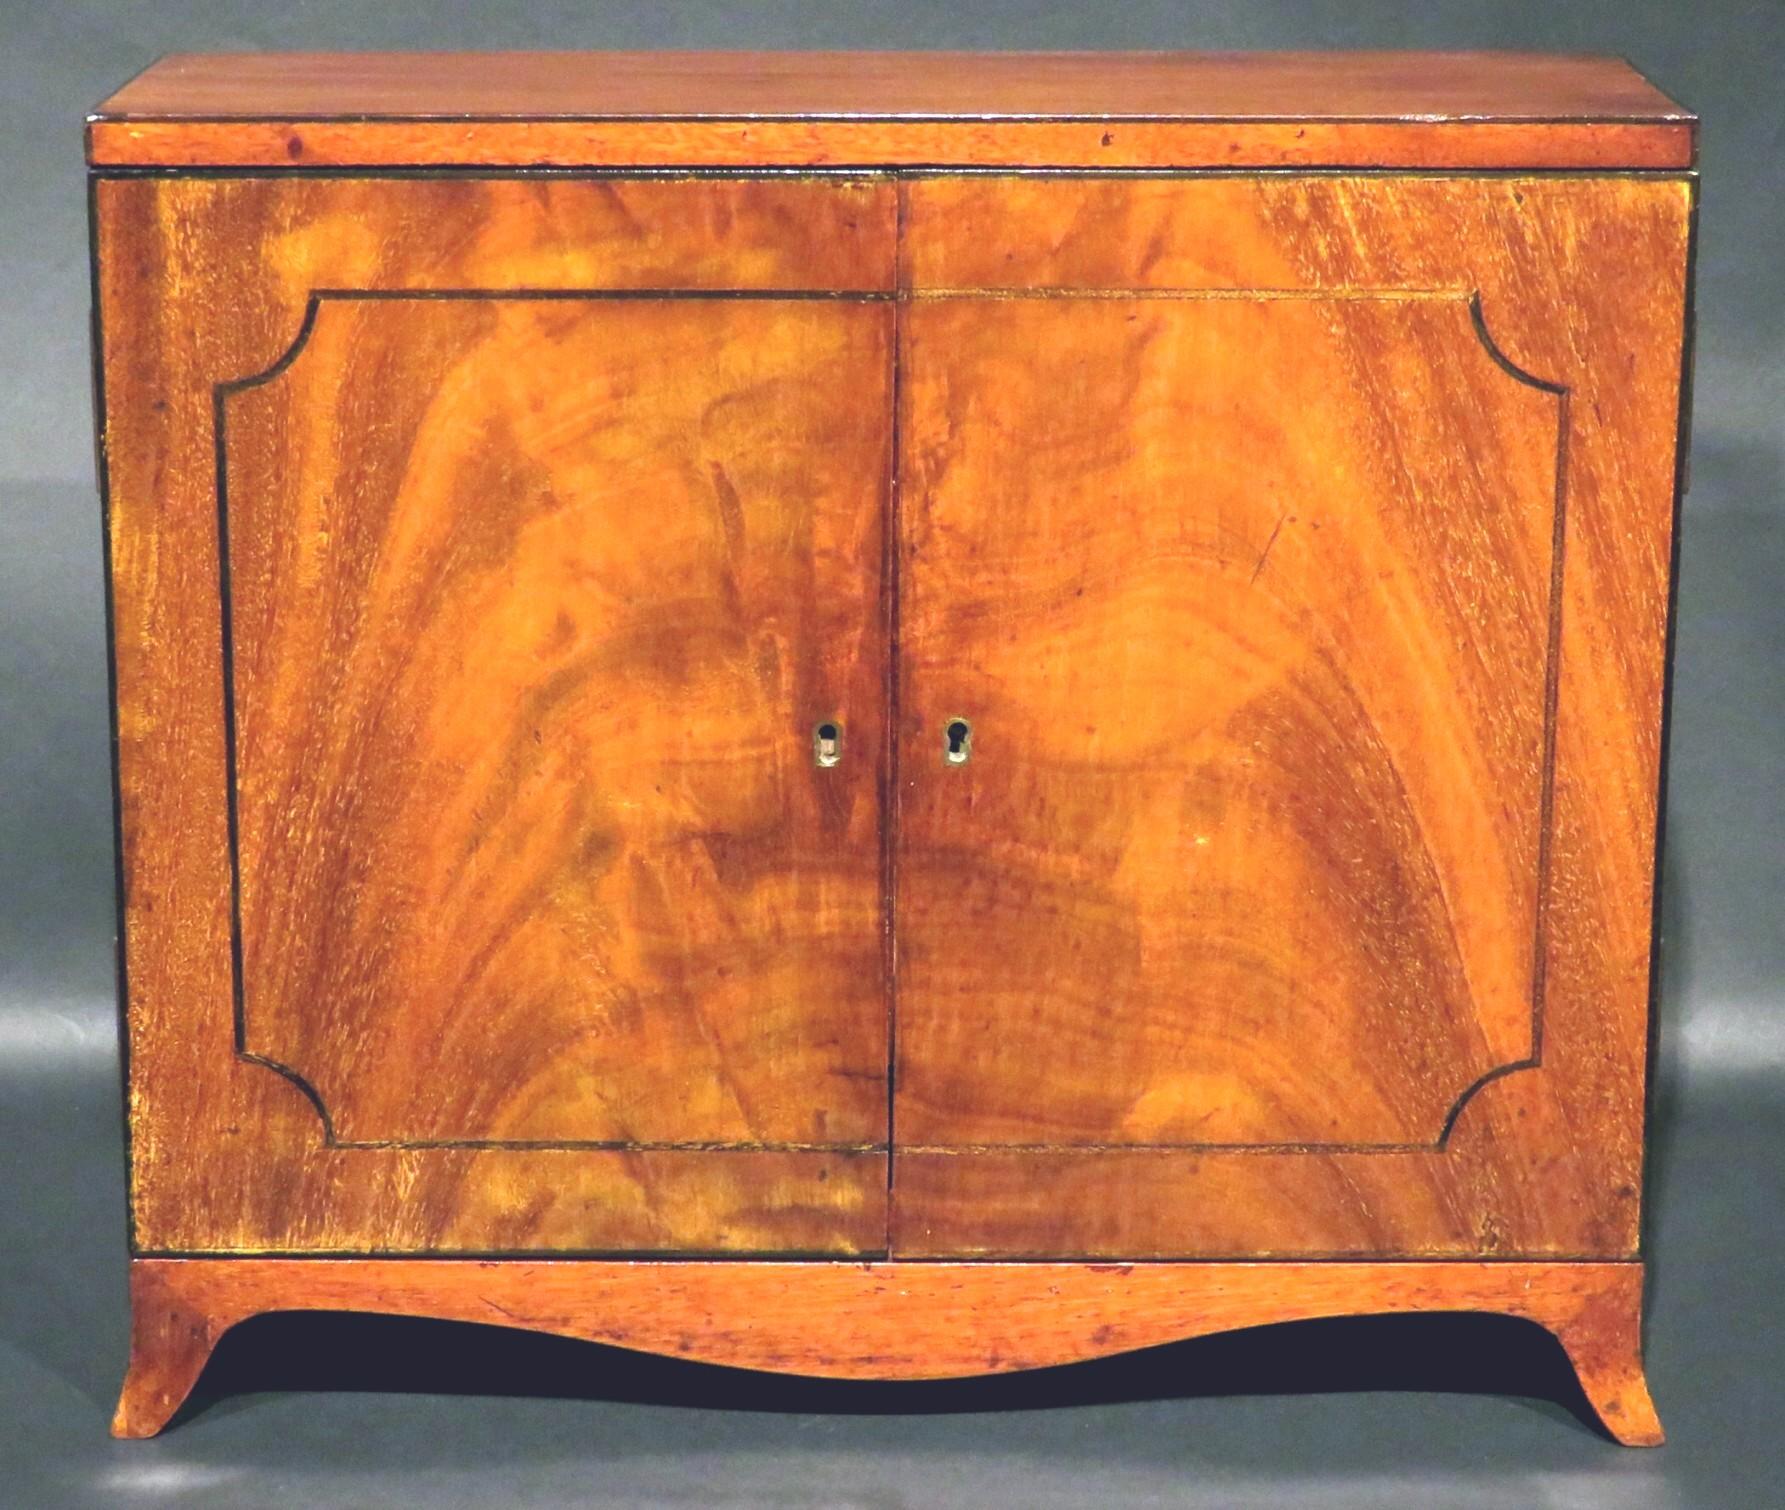 A very handsome and finely proportioned 19th century inlaid mahogany Tantalus in the form of a Georgian side cabinet, showing a richly figured & finely constructed mahogany case with an ebonized strung top & cabinet doors fitted with a functioning